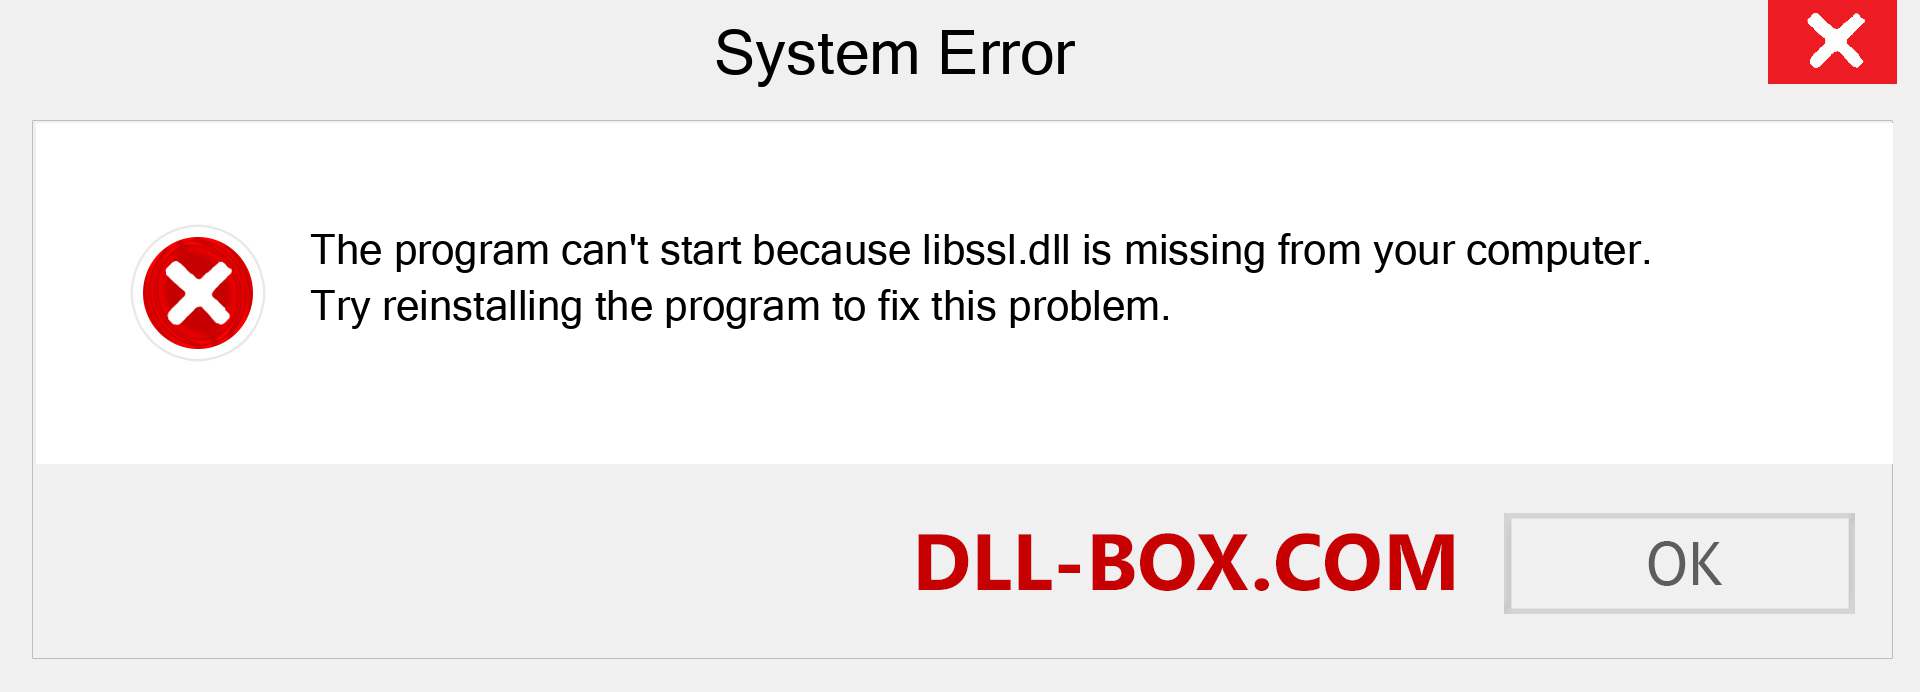  libssl.dll file is missing?. Download for Windows 7, 8, 10 - Fix  libssl dll Missing Error on Windows, photos, images